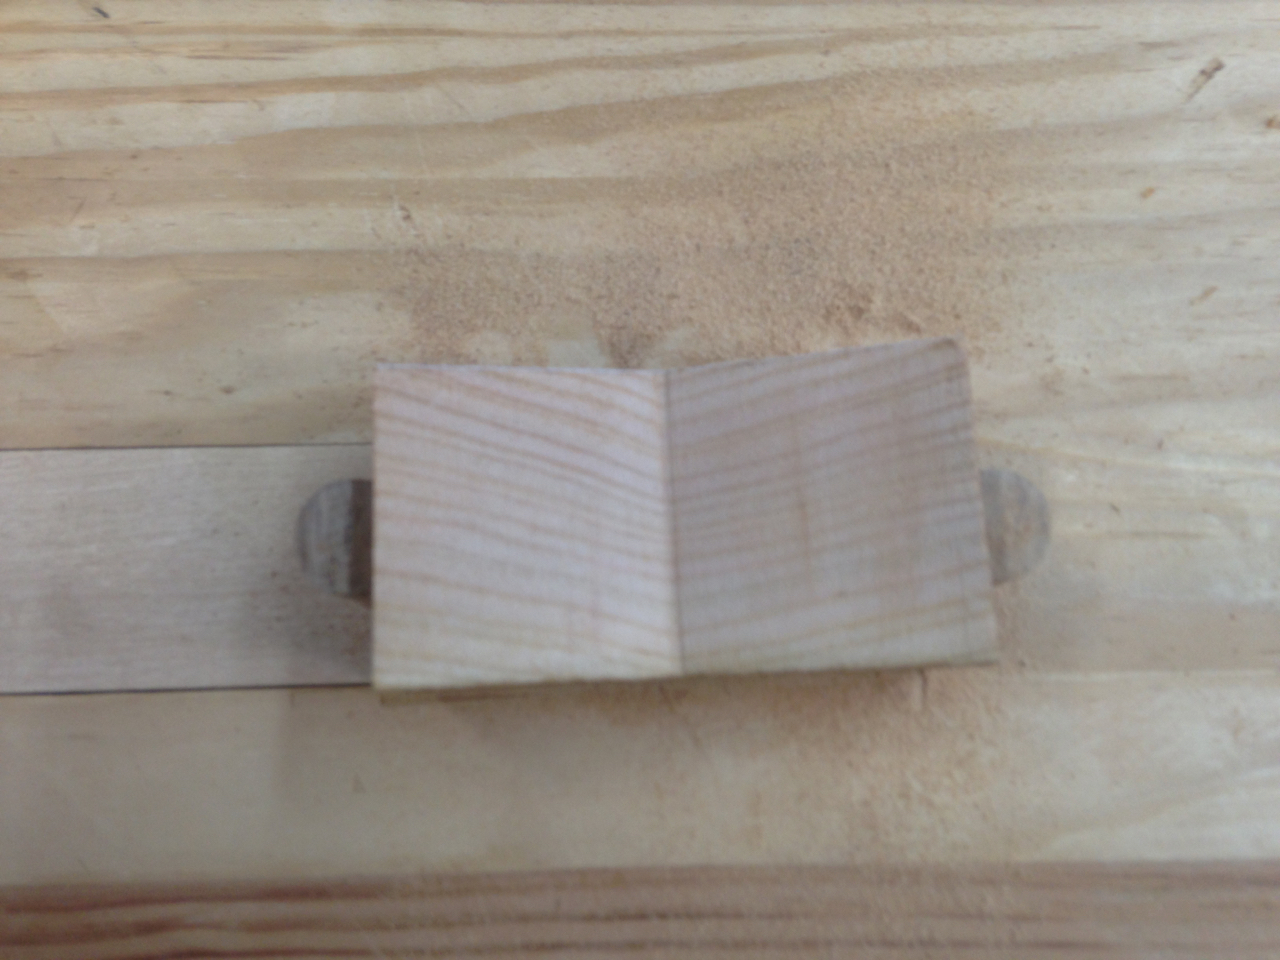 rasping the sides of the bowtie blank